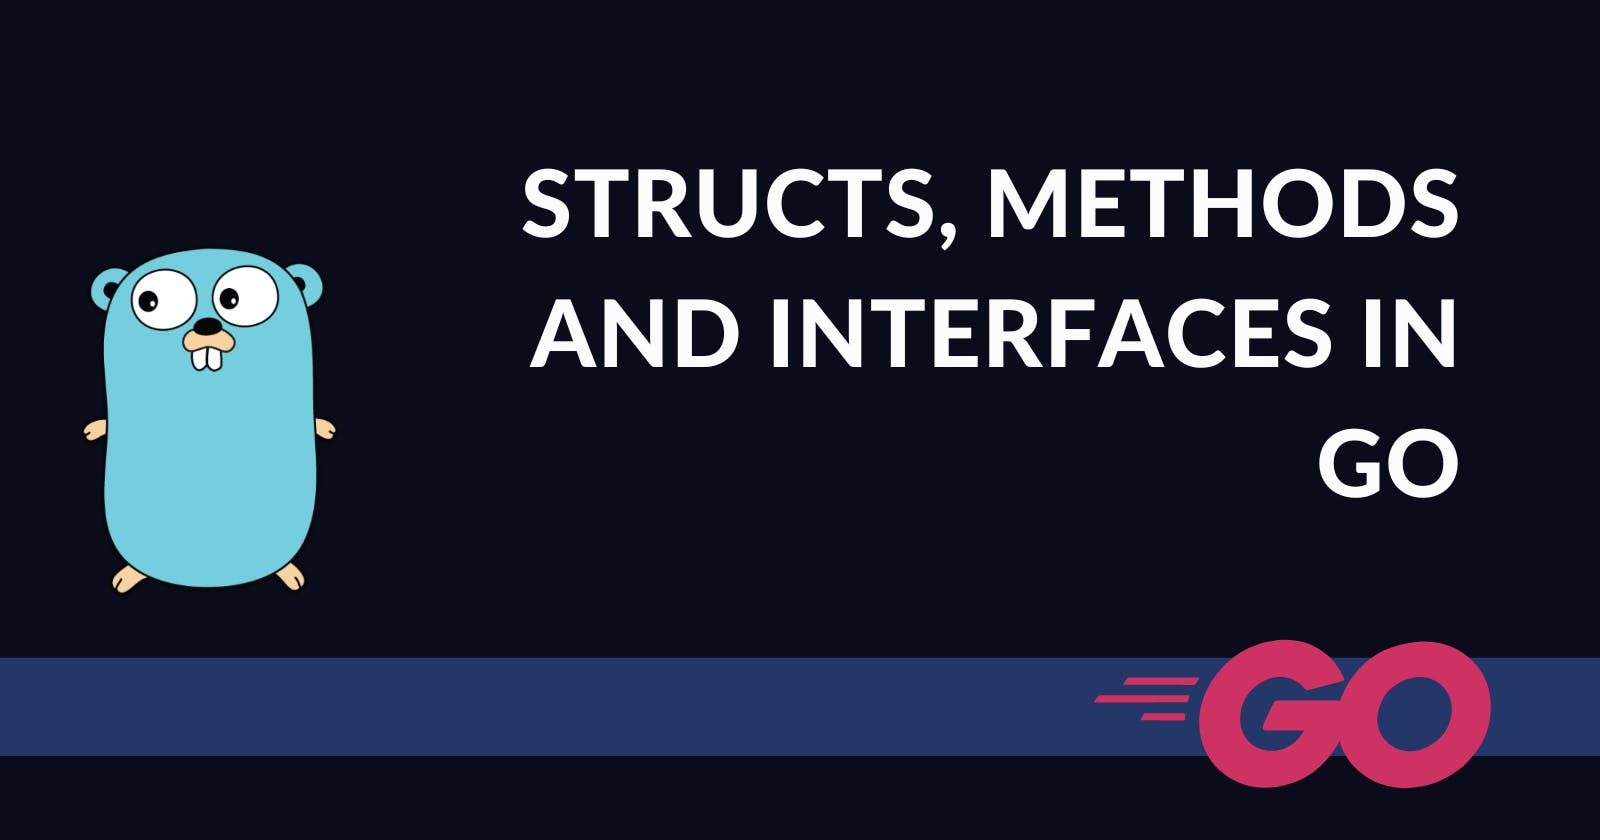 Structs, Methods and Interfaces in Go (Blog 13 of the Go Series)